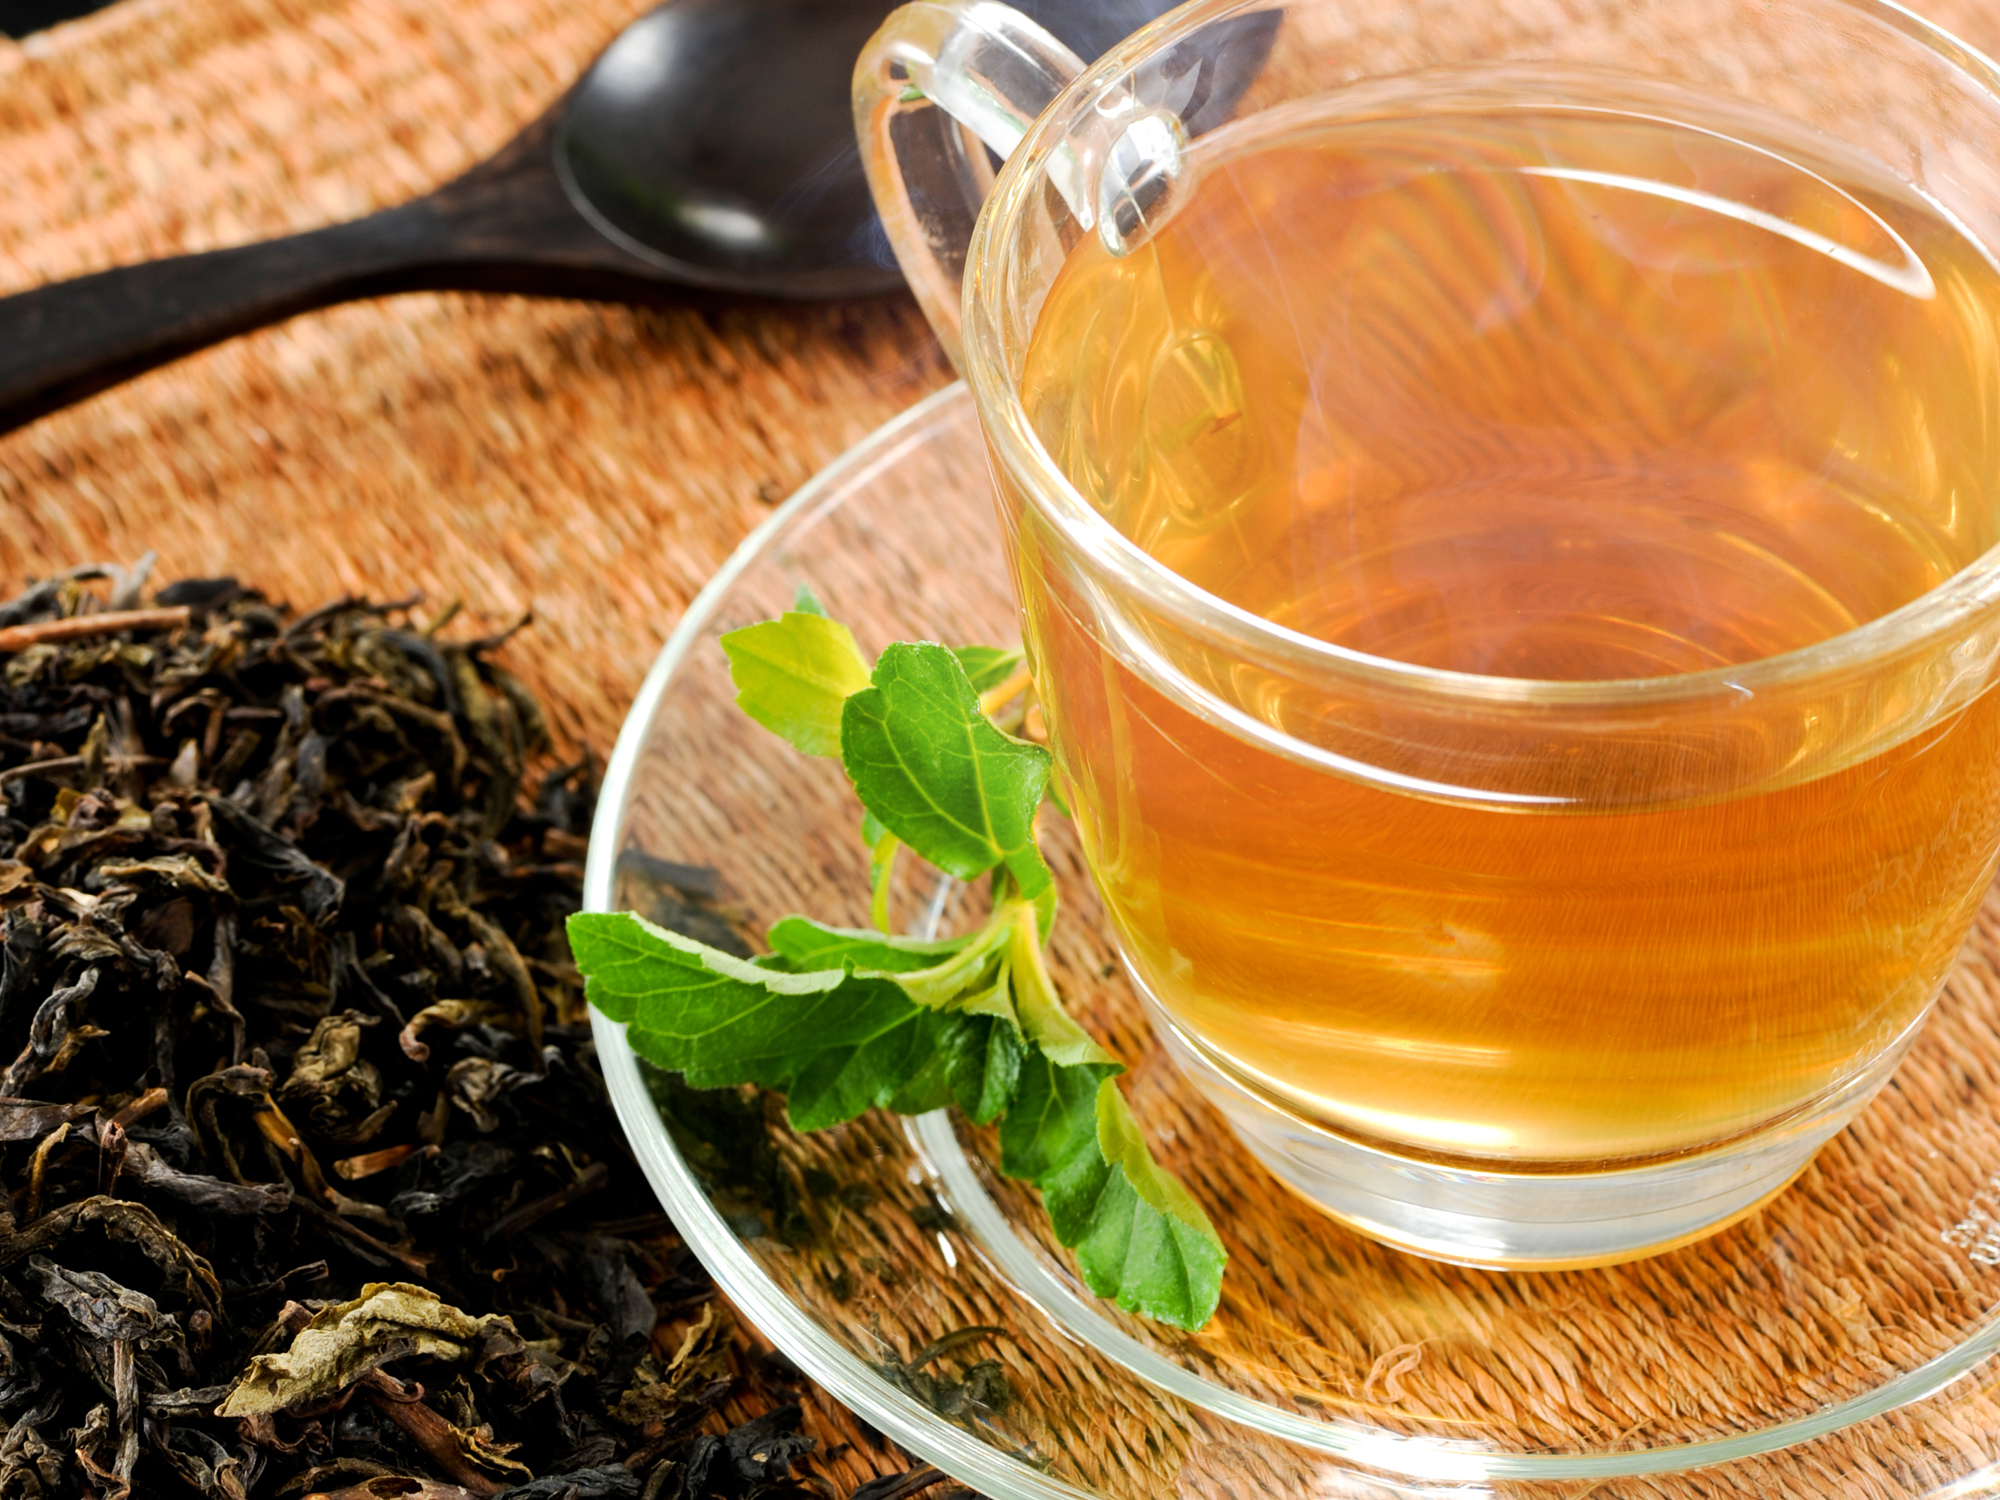 The simplest way to supersize the cancer-fighting power of green tea